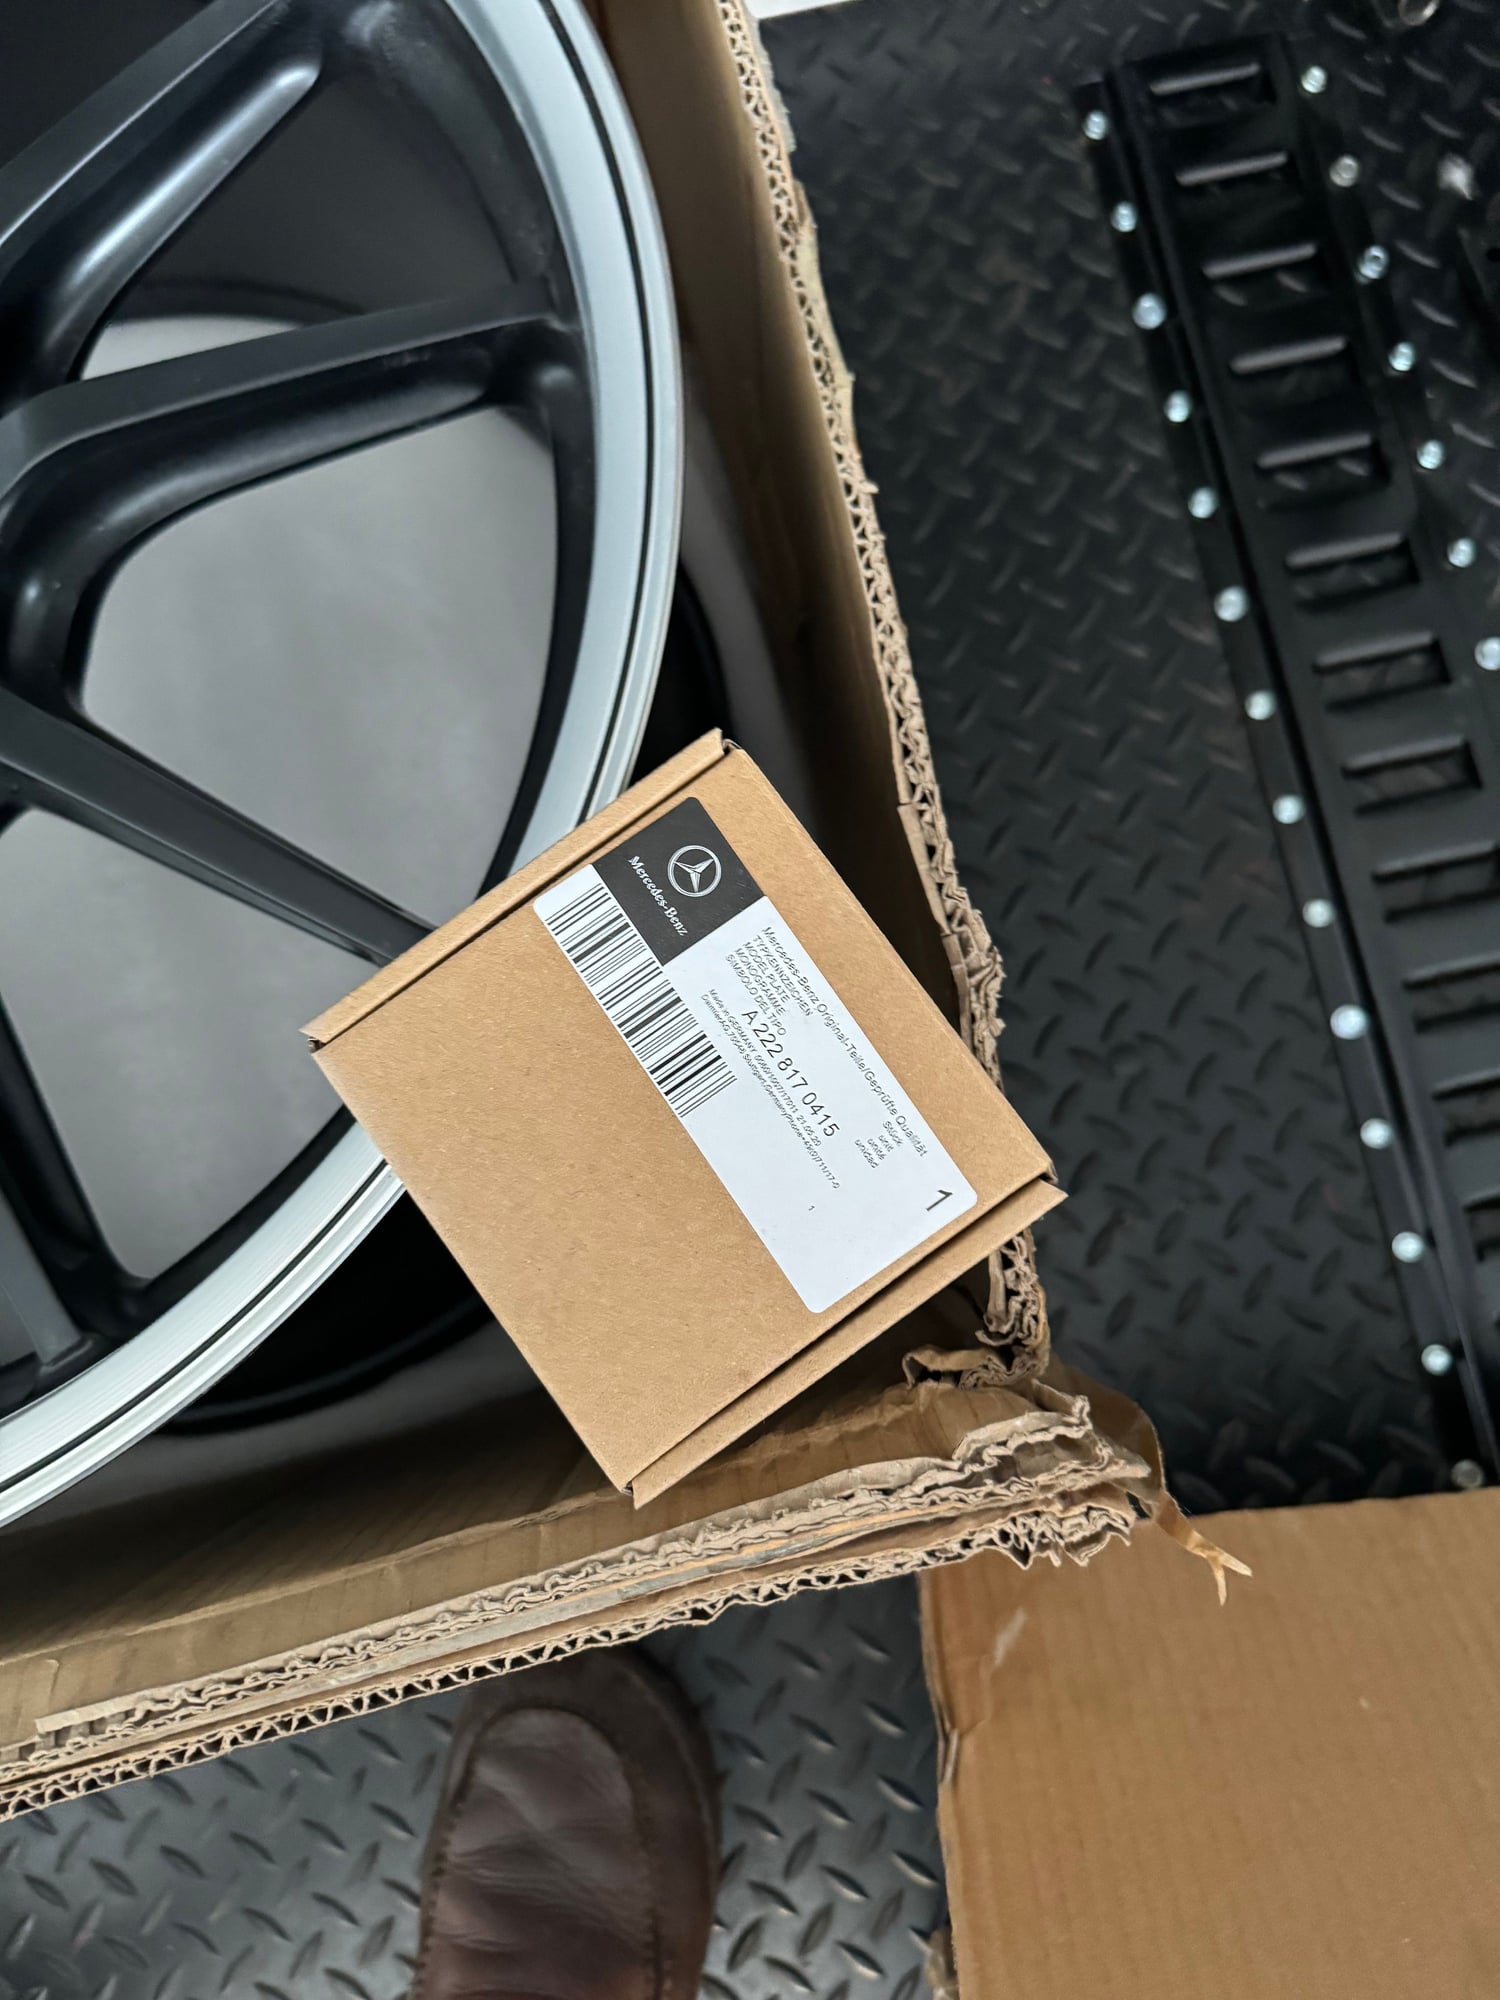 Wheels and Tires/Axles - AMG GT R Wheelset newly refurbished - Used - 2018 to 2020 Mercedes-Benz AMG GT R - Greensboro, NC 27455, United States